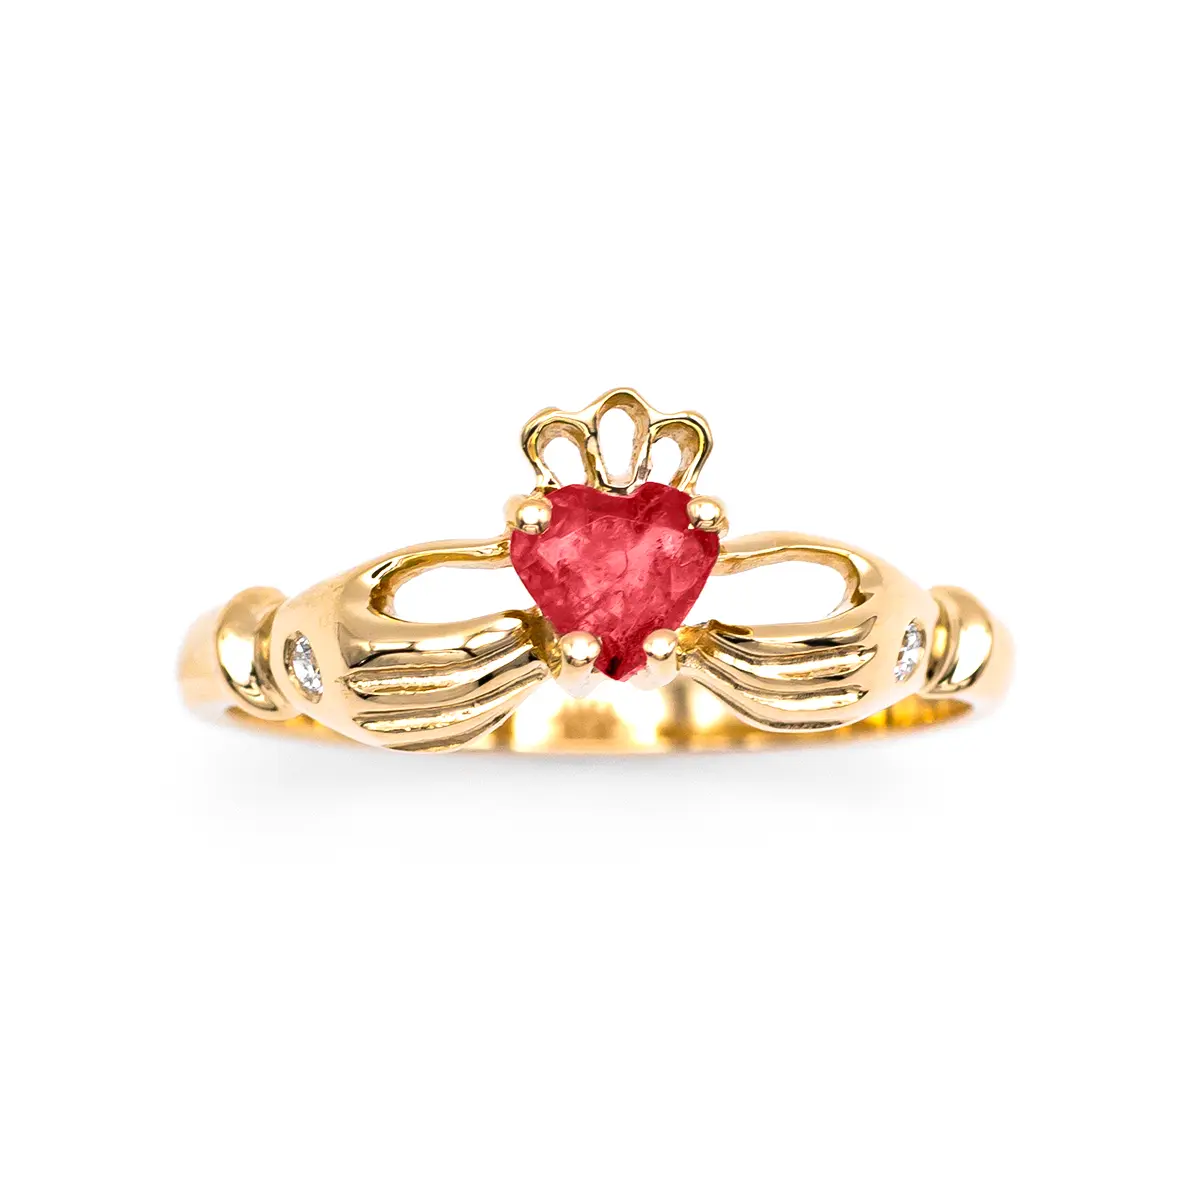 Charming 14k Gold Claddagh Ring With A Heart-shape Ruby And Diamonds...